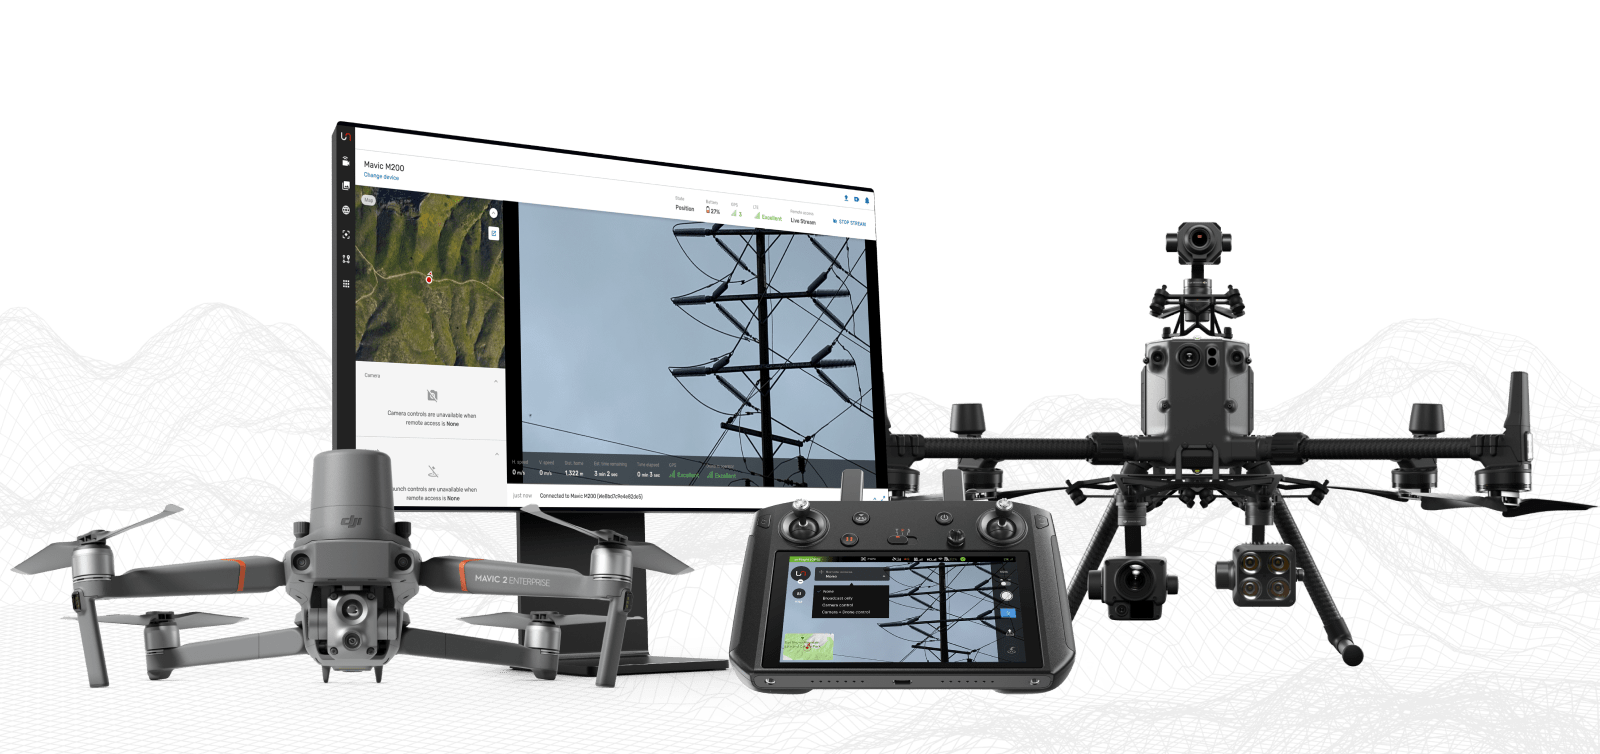 Read full post: What Are the Best Drones to Use for Power Line Inspections?